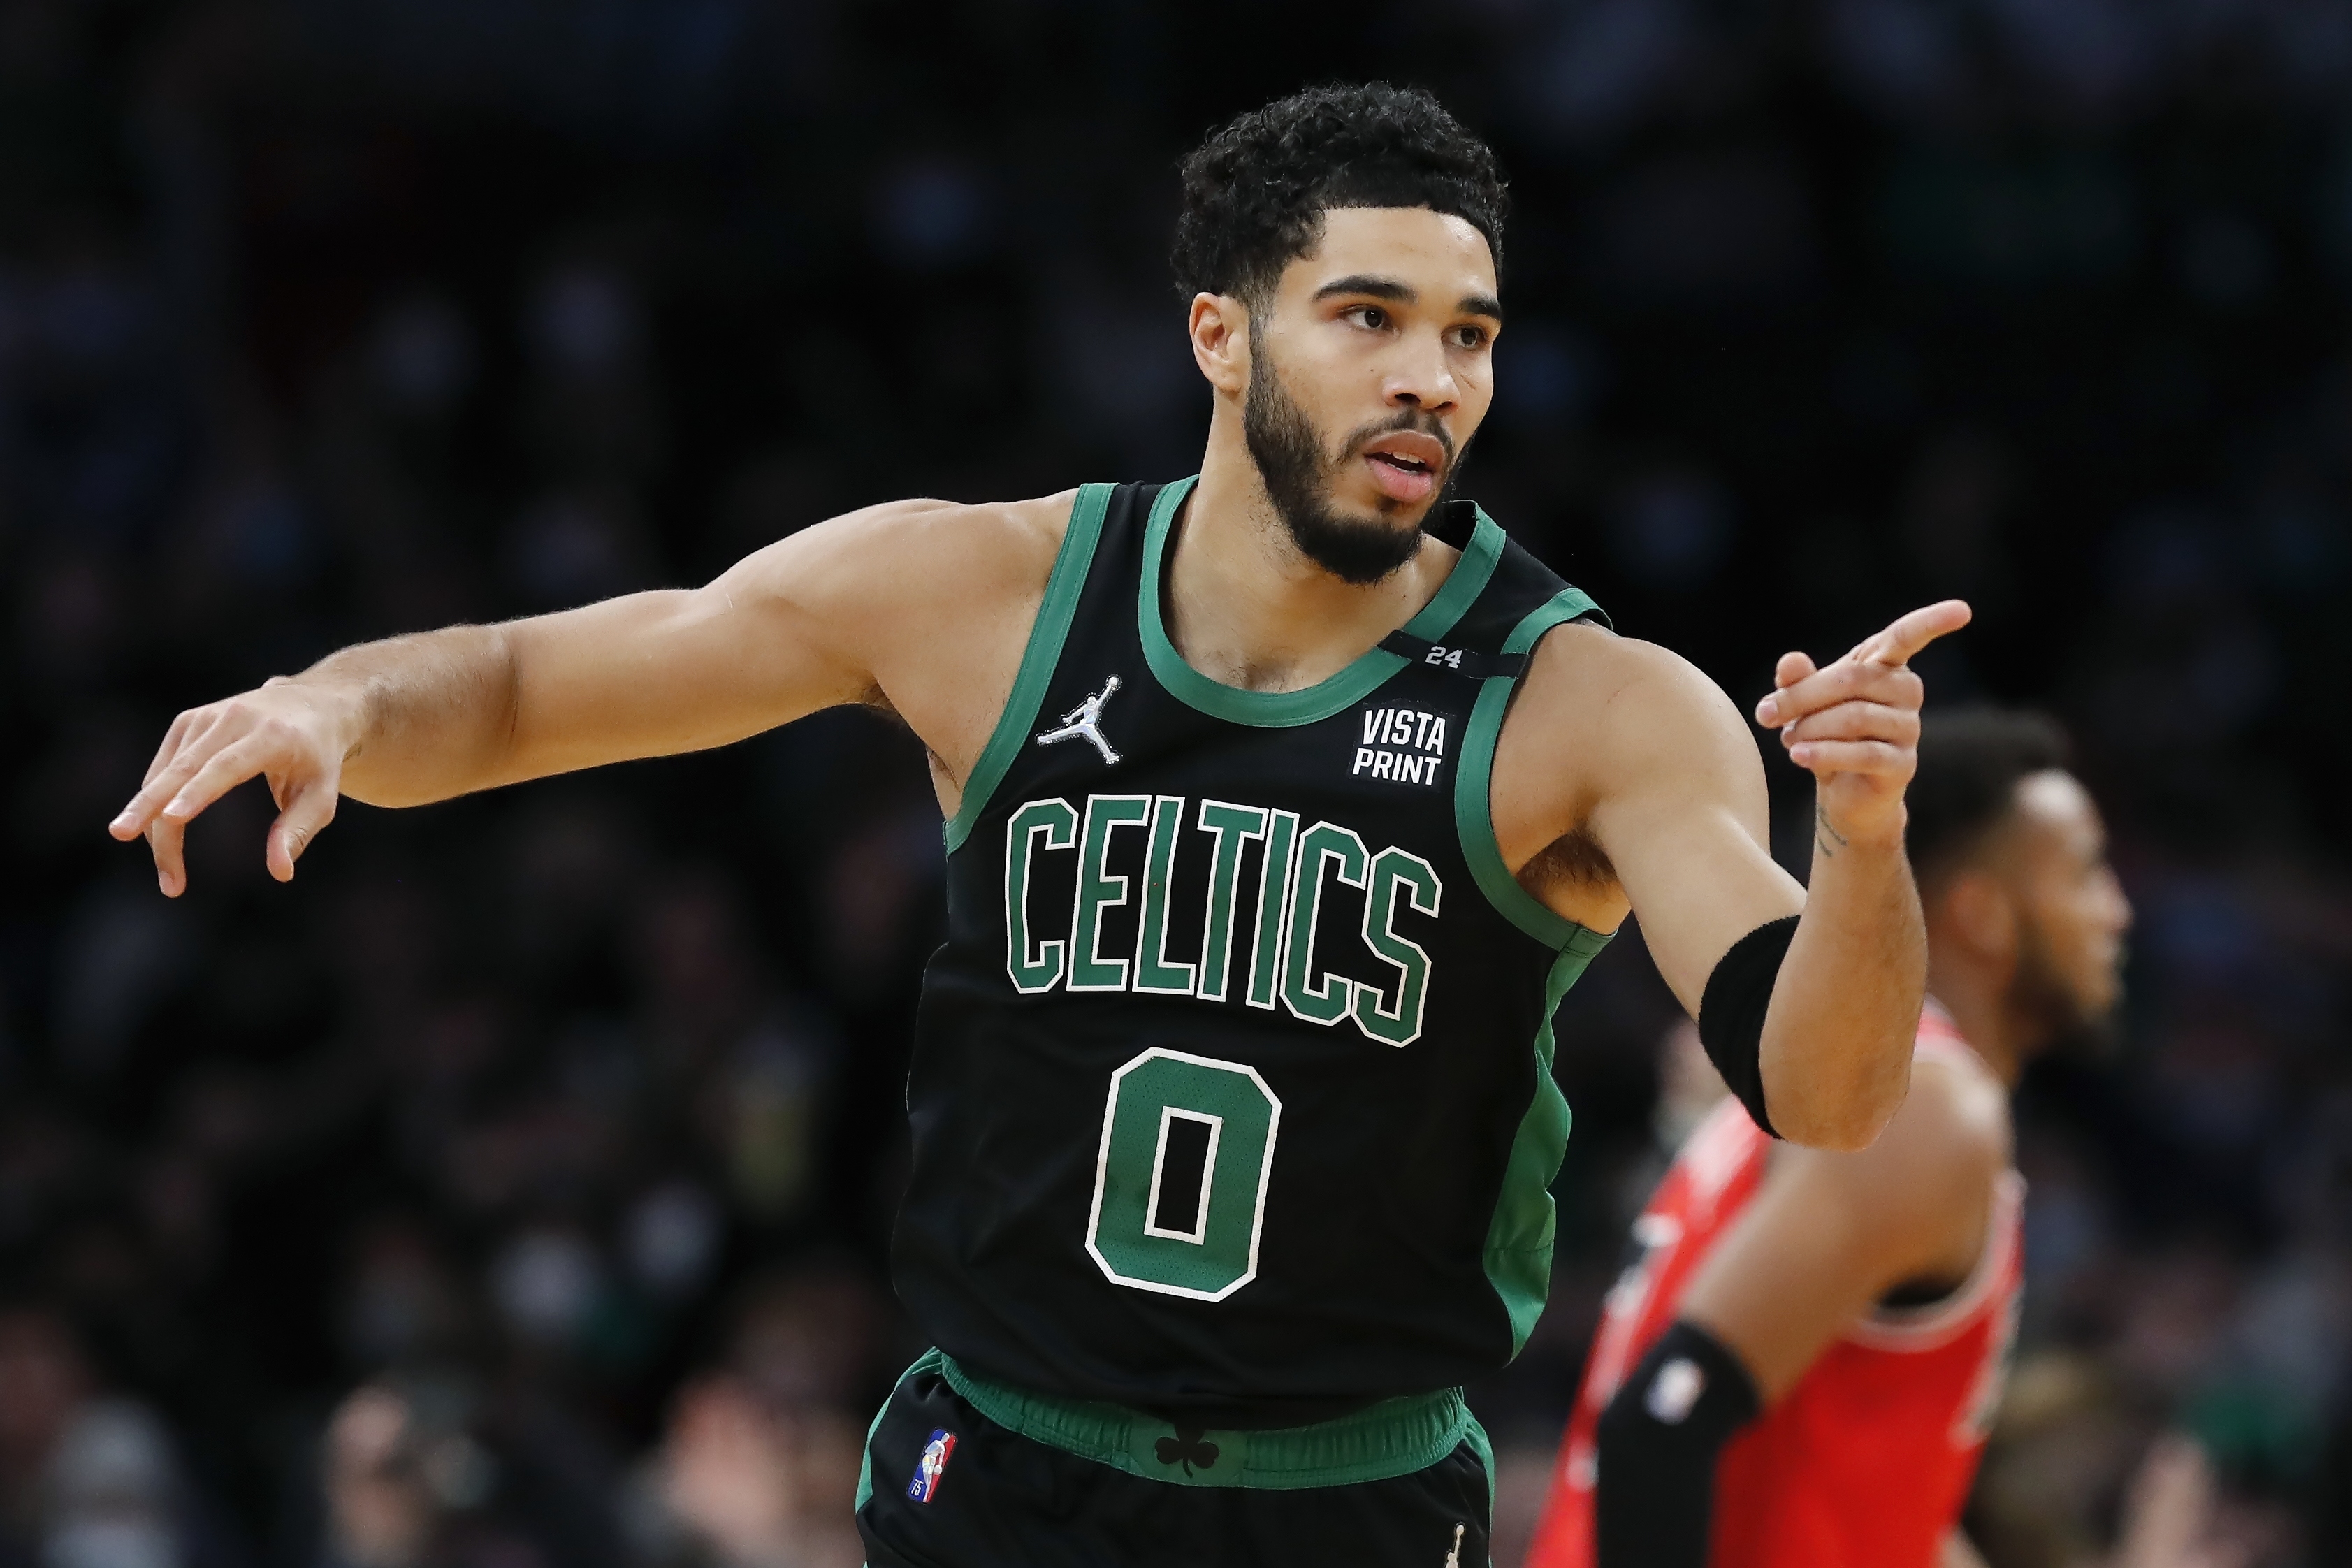 Jayson Tatum is floundering from the 3-point line. Can he fix it